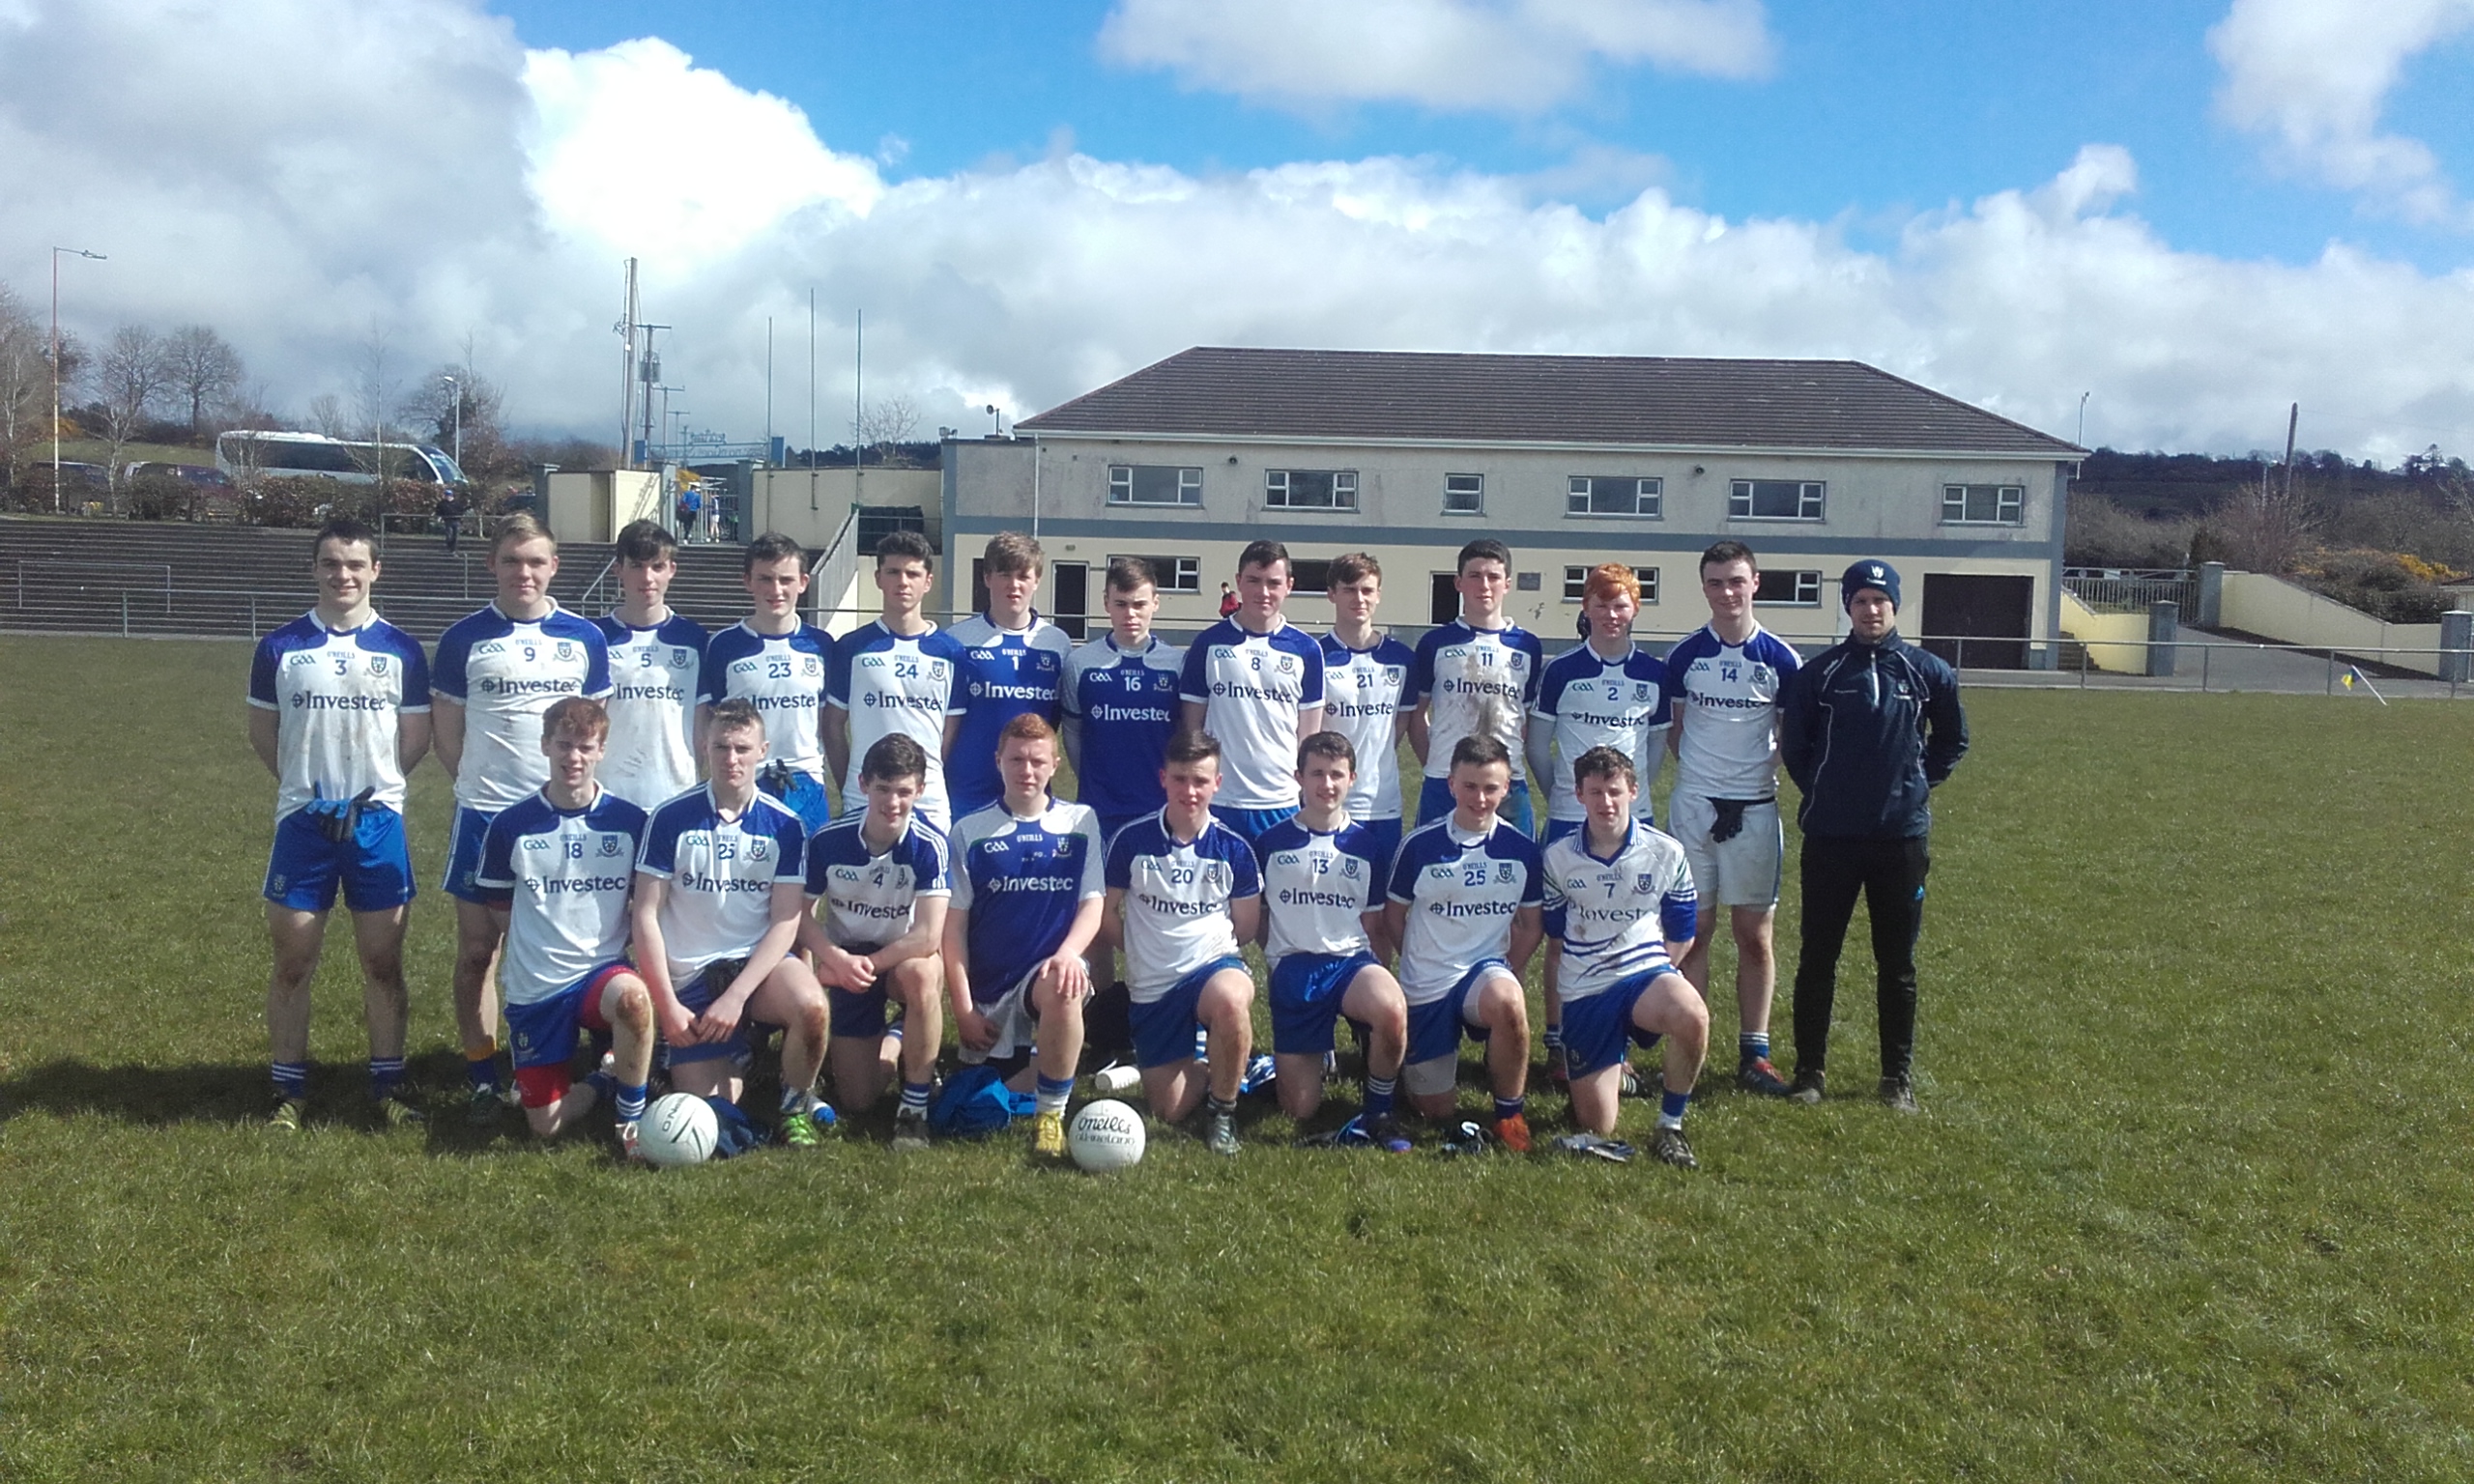 Good run out for Monaghan U16’s in preparation for Upcoming Ulster Buncrana Cup